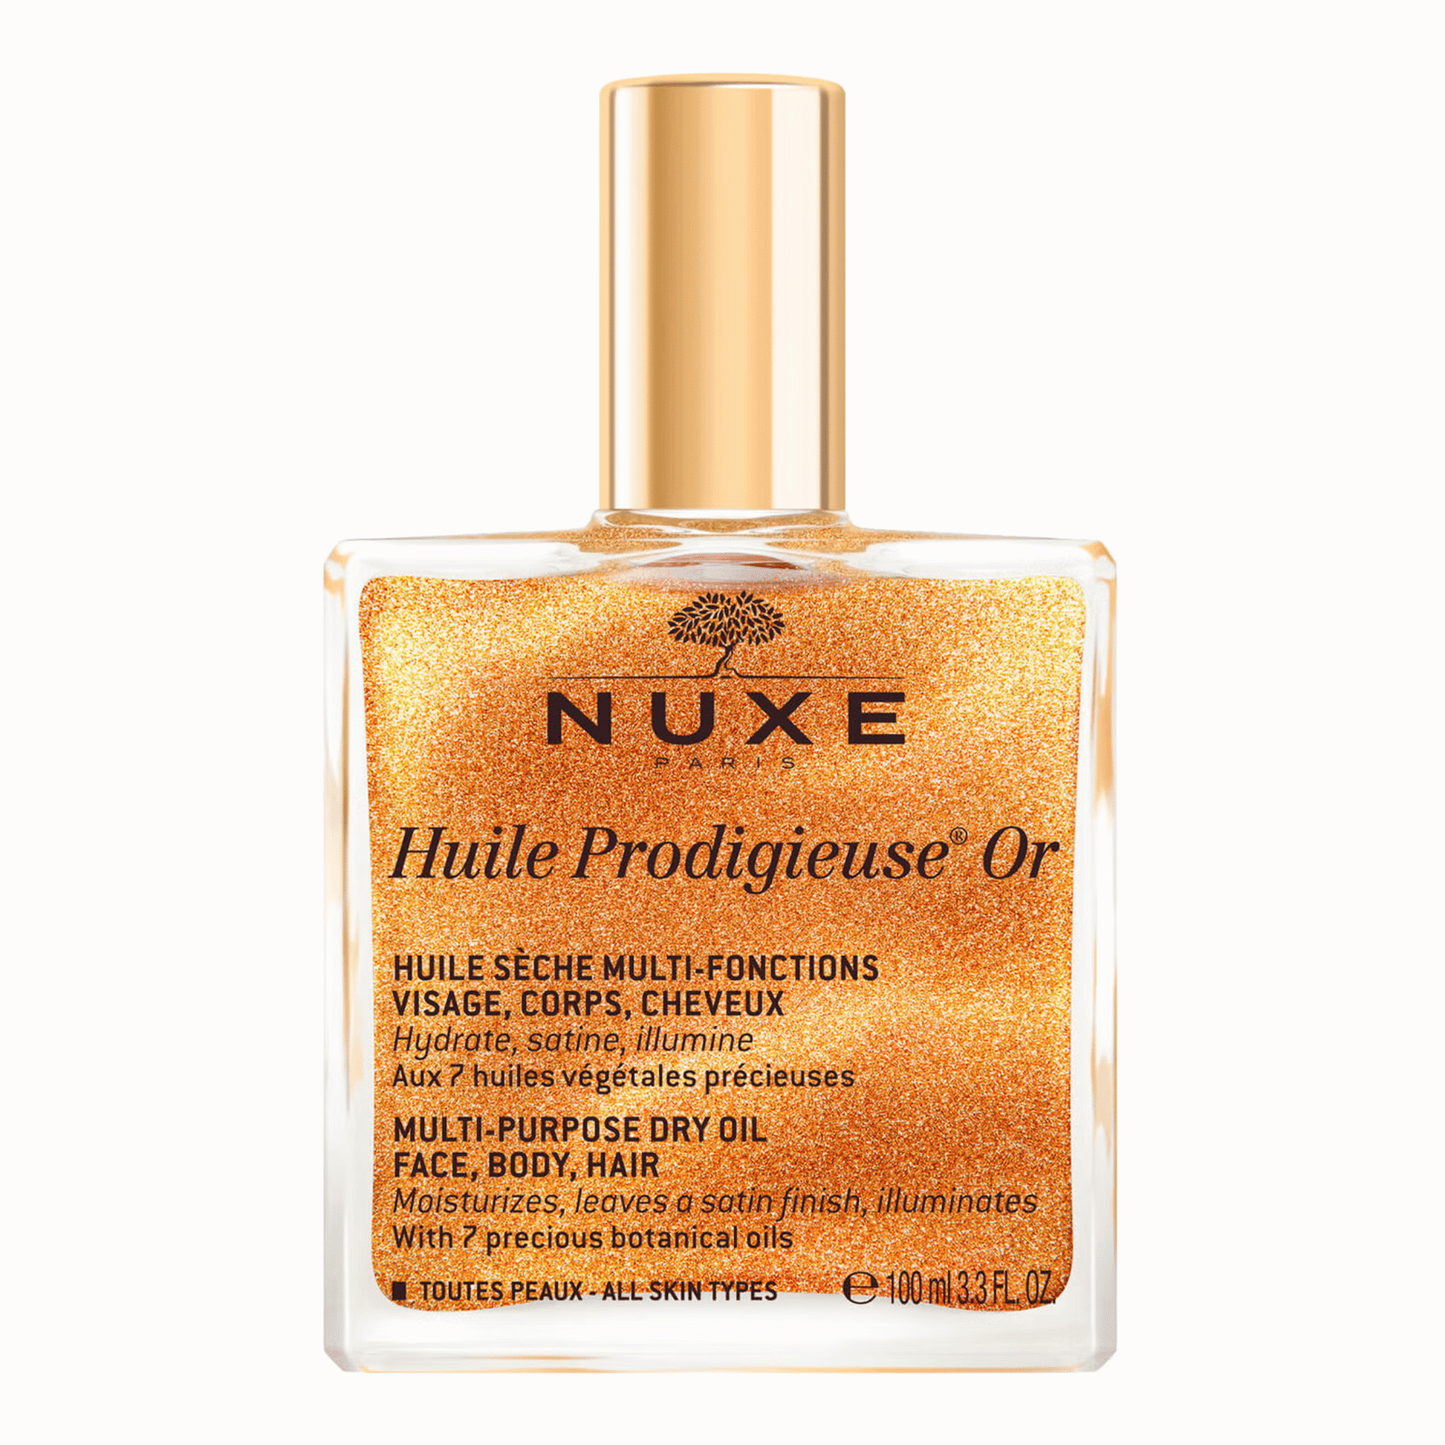 Primary Image of Huile Prodigieuse Shimmering Dry Oil 100 ml